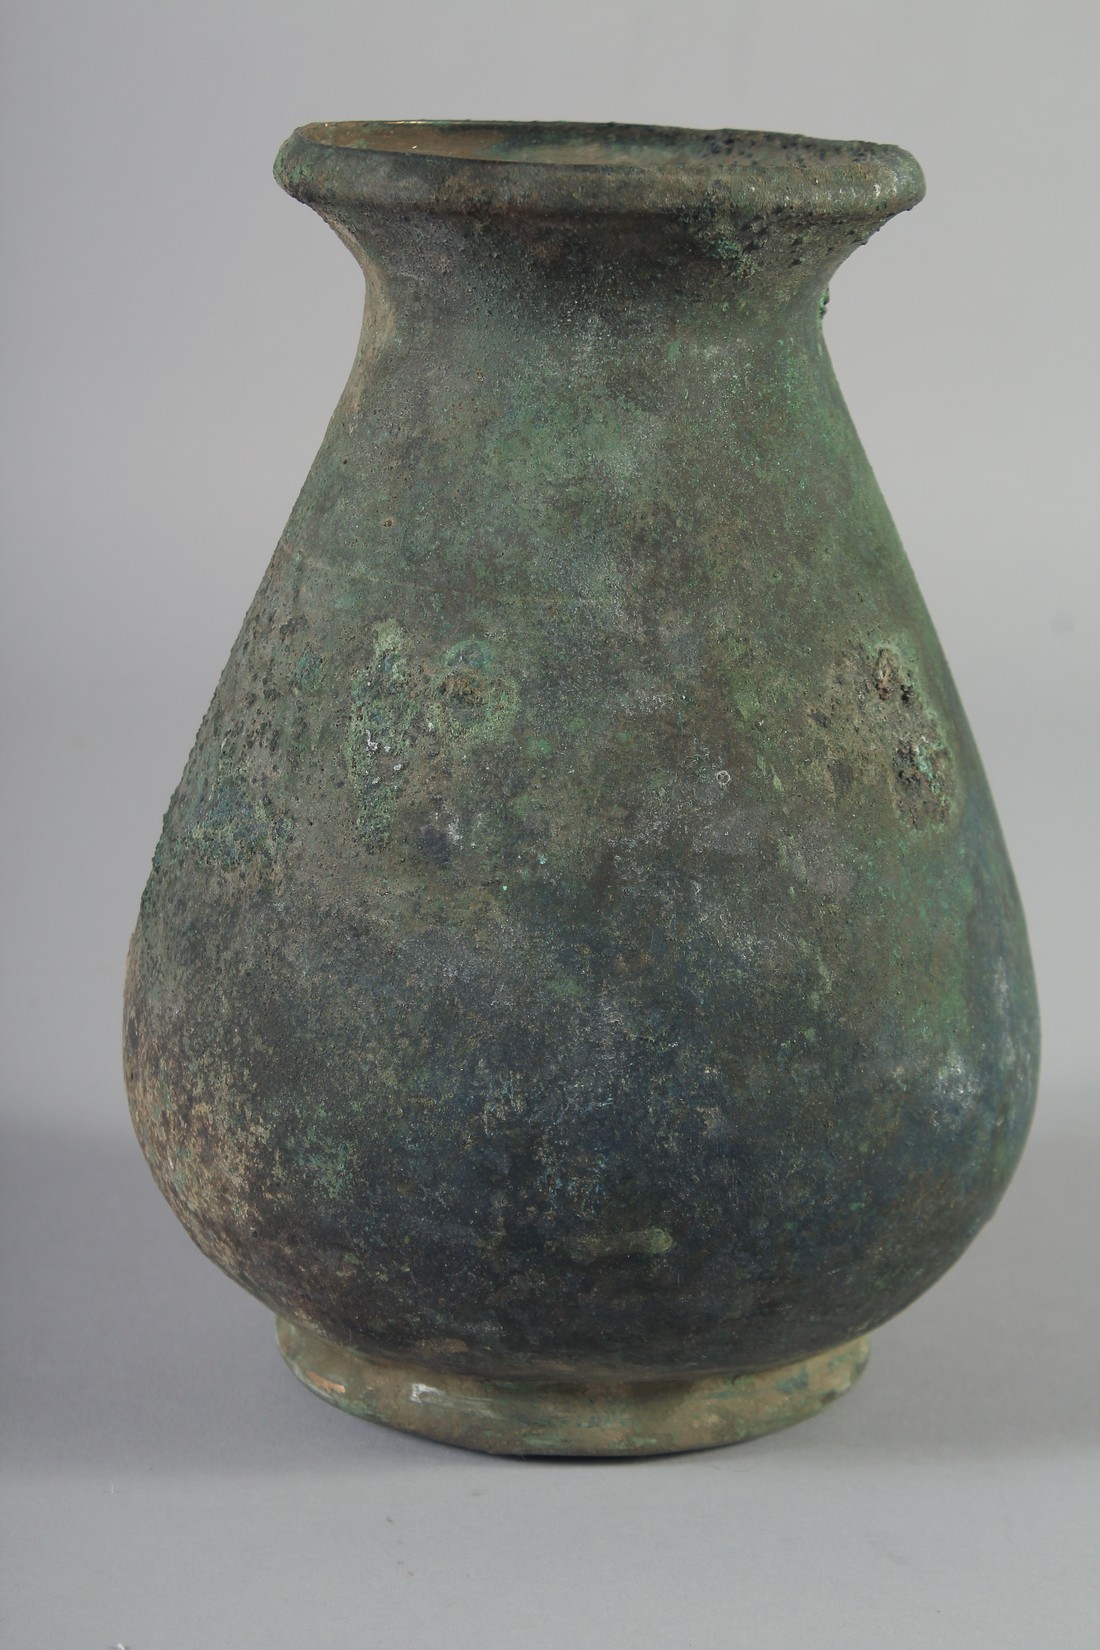 AN UNUSUAL ANCIENT PERSIAN OR ROMAN VASE, 19.5cm high. - Image 2 of 5